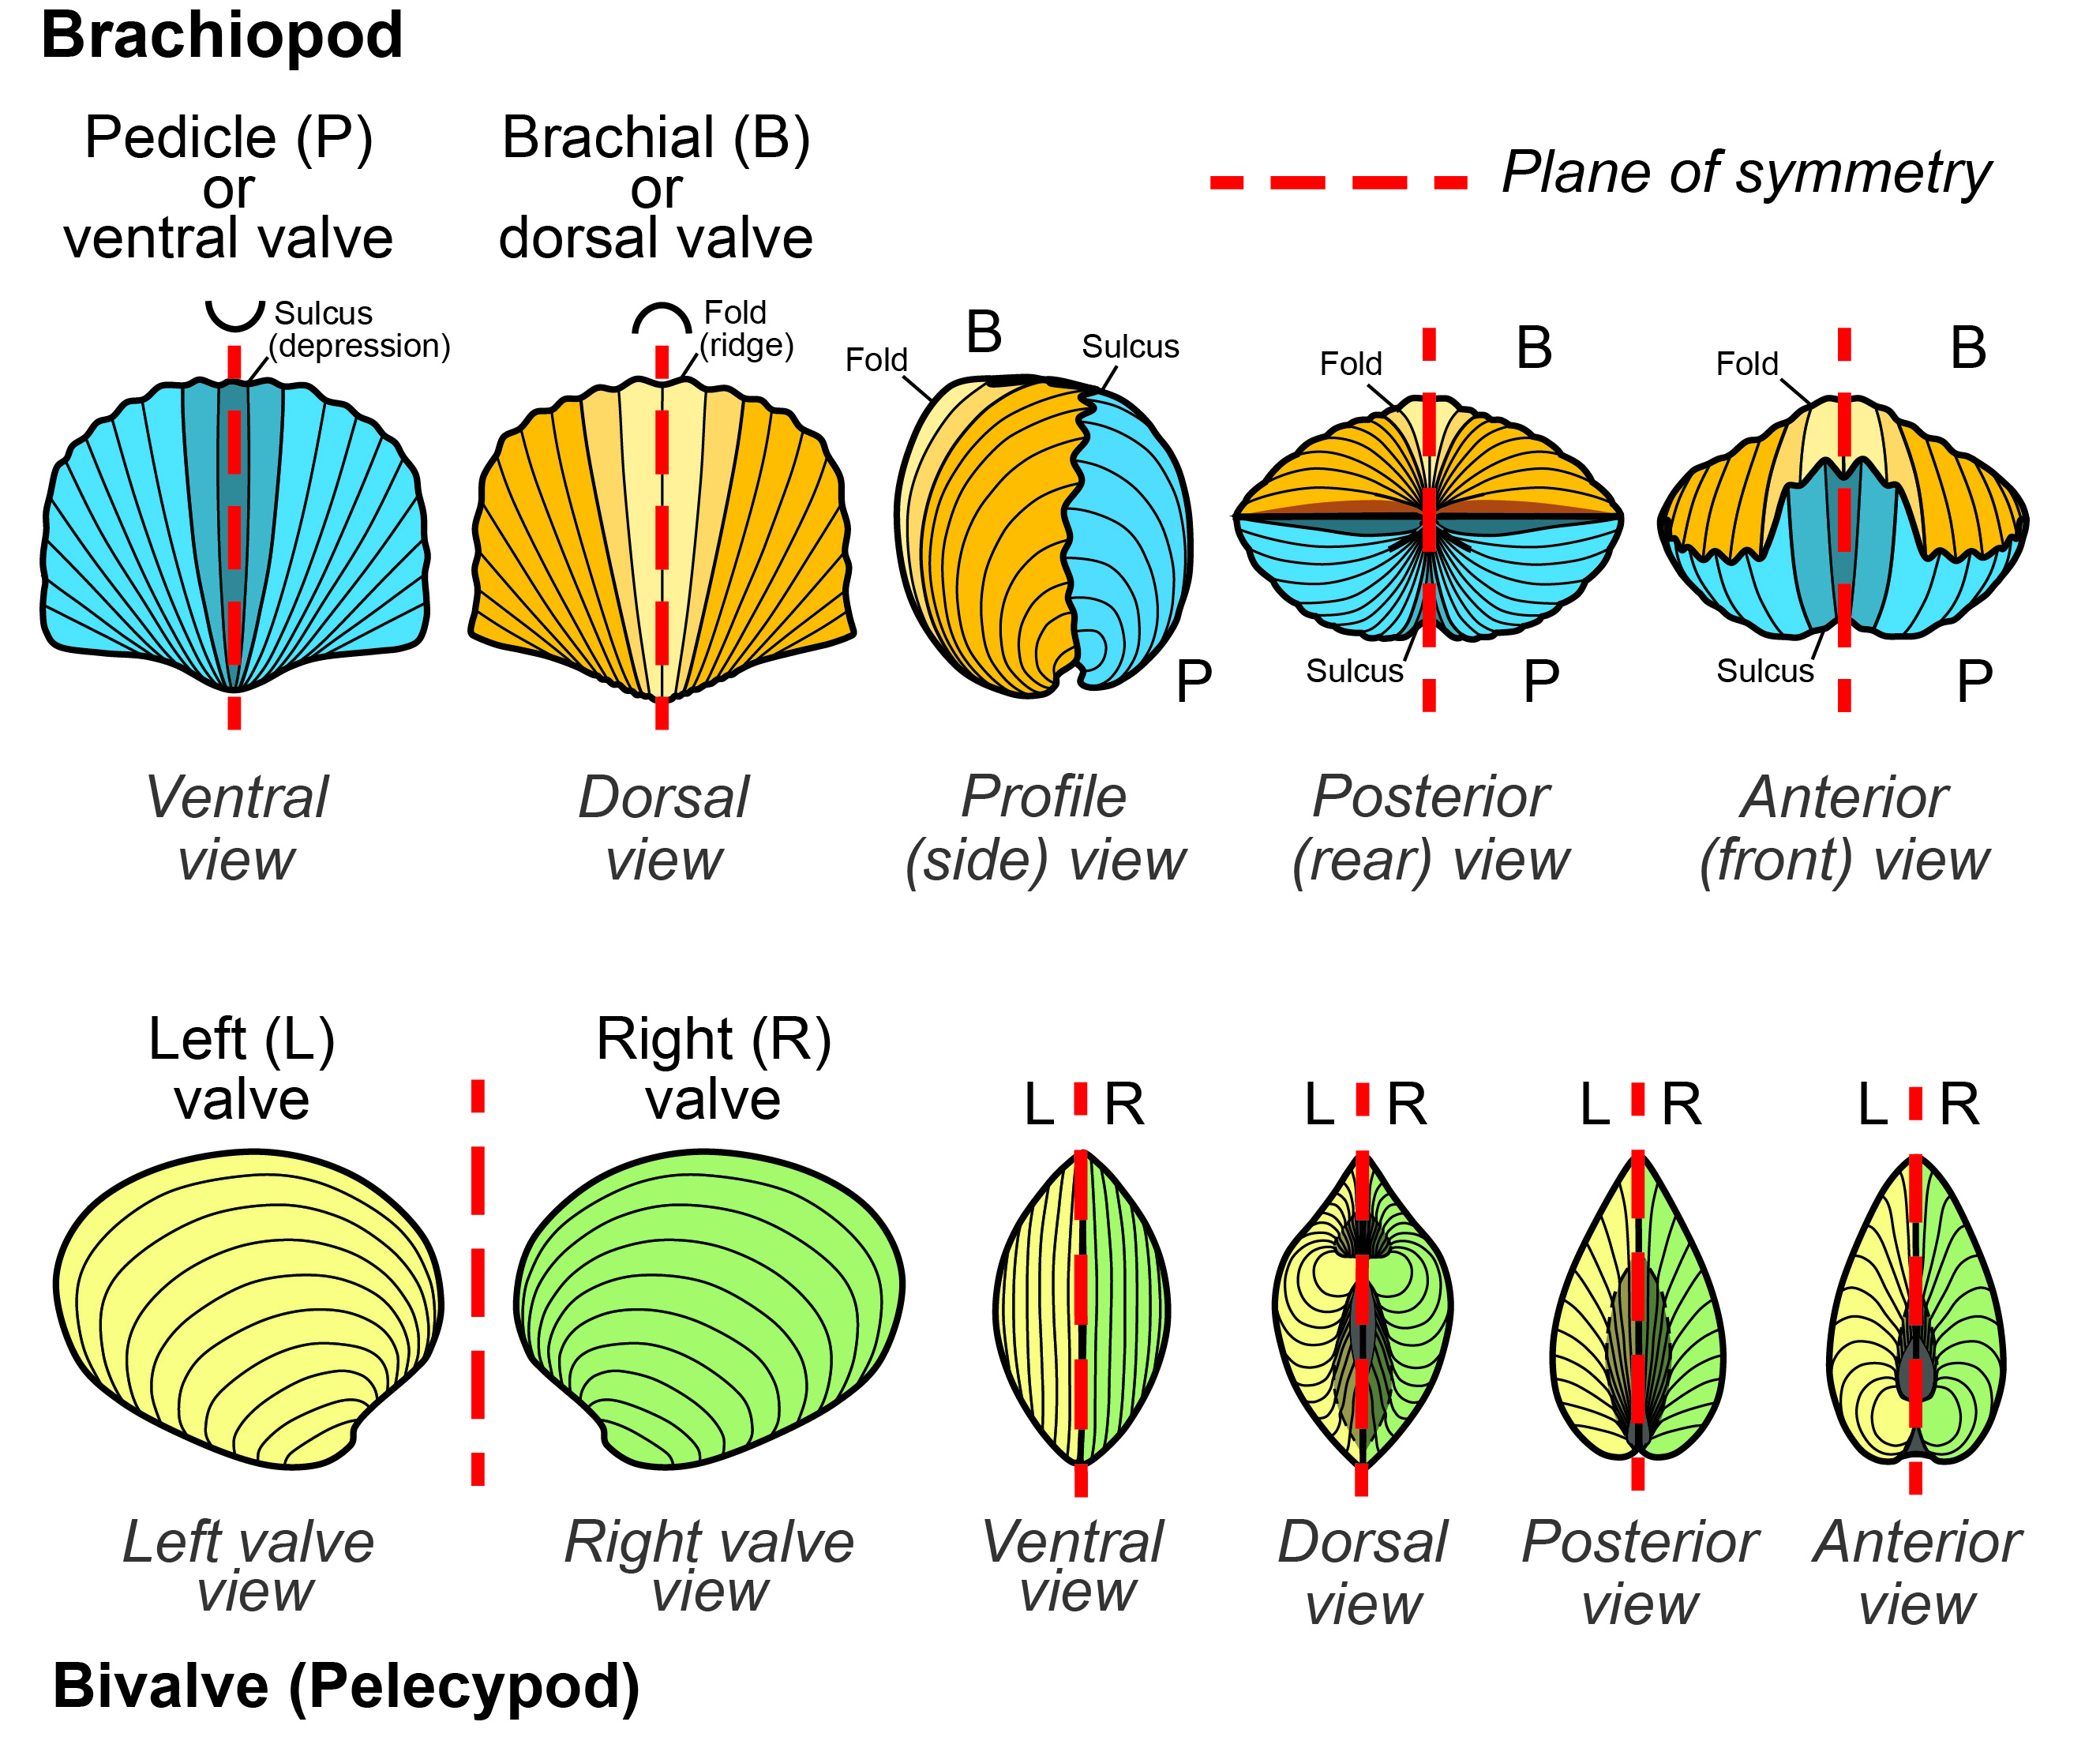 Comparison of brachiopod and clam shells. Both shells have two valves, which are attached along a hinge line. Clam valves are mirror images of each other. Brachiopod valves are different from each other. Dashed lines represent planes of symmetry.